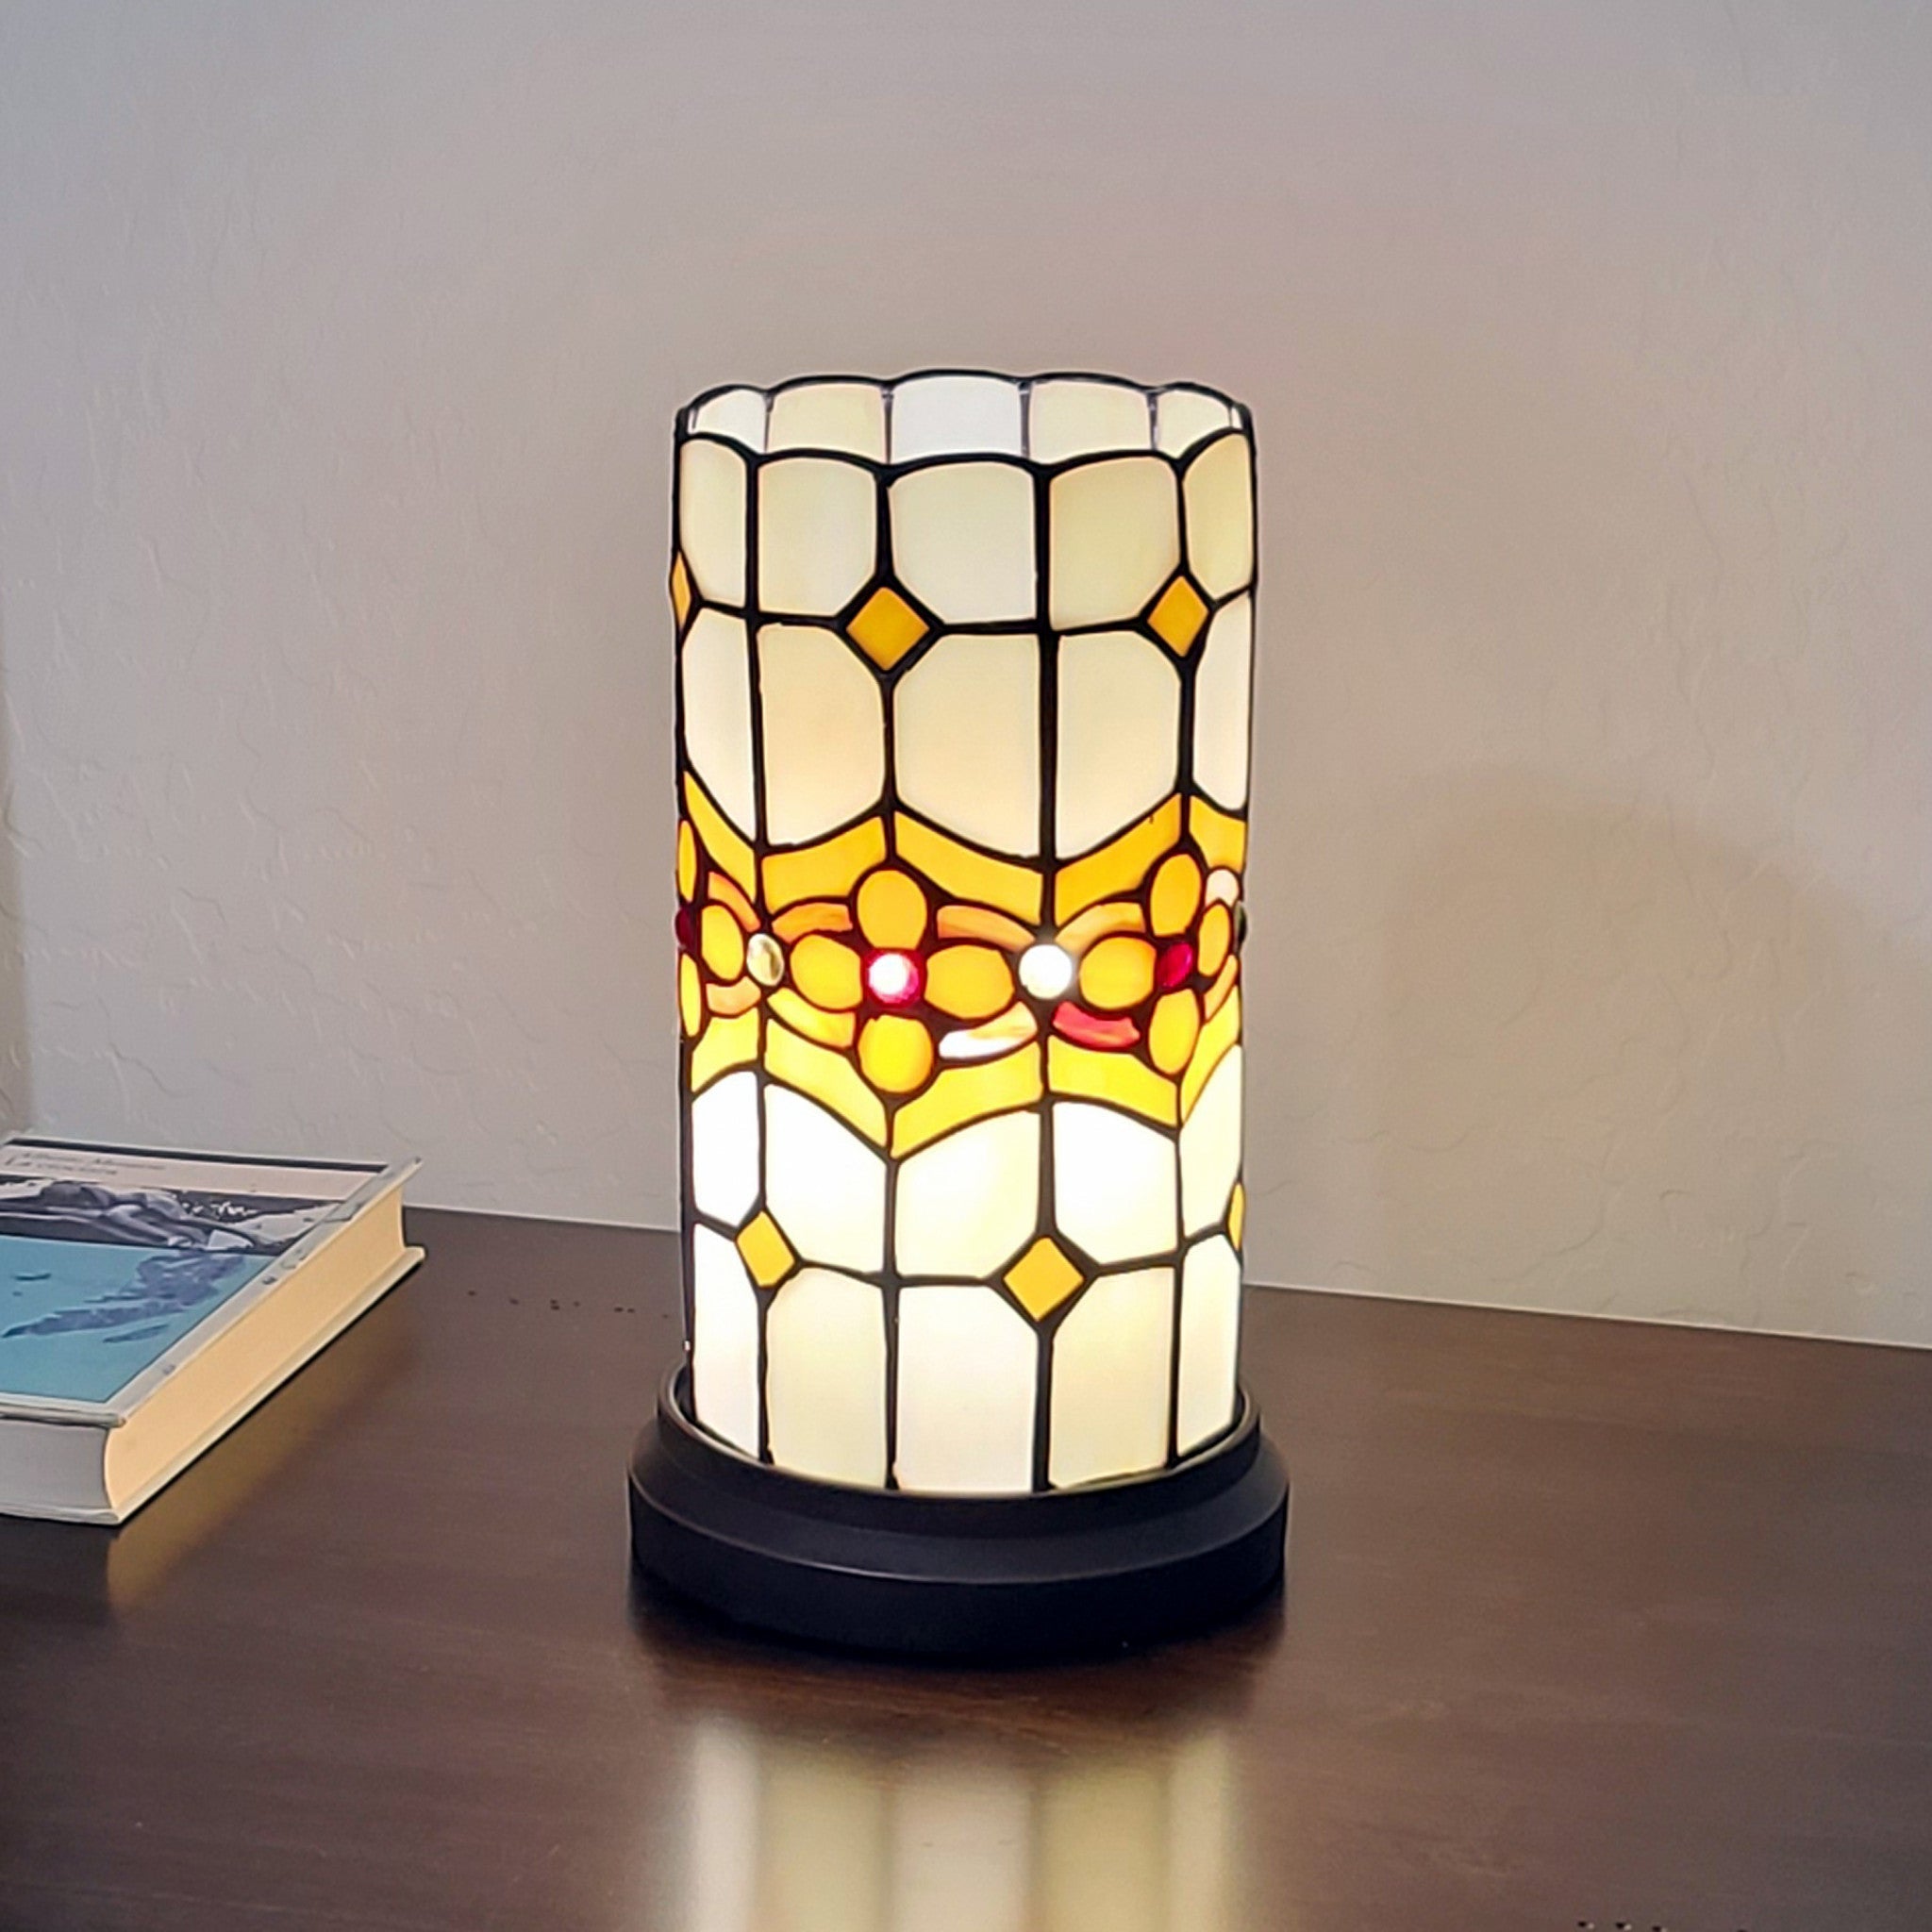 11" Tiffany Style Mosaic Tile Accent Table Lamp - Tuesday Morning-Table Lamps